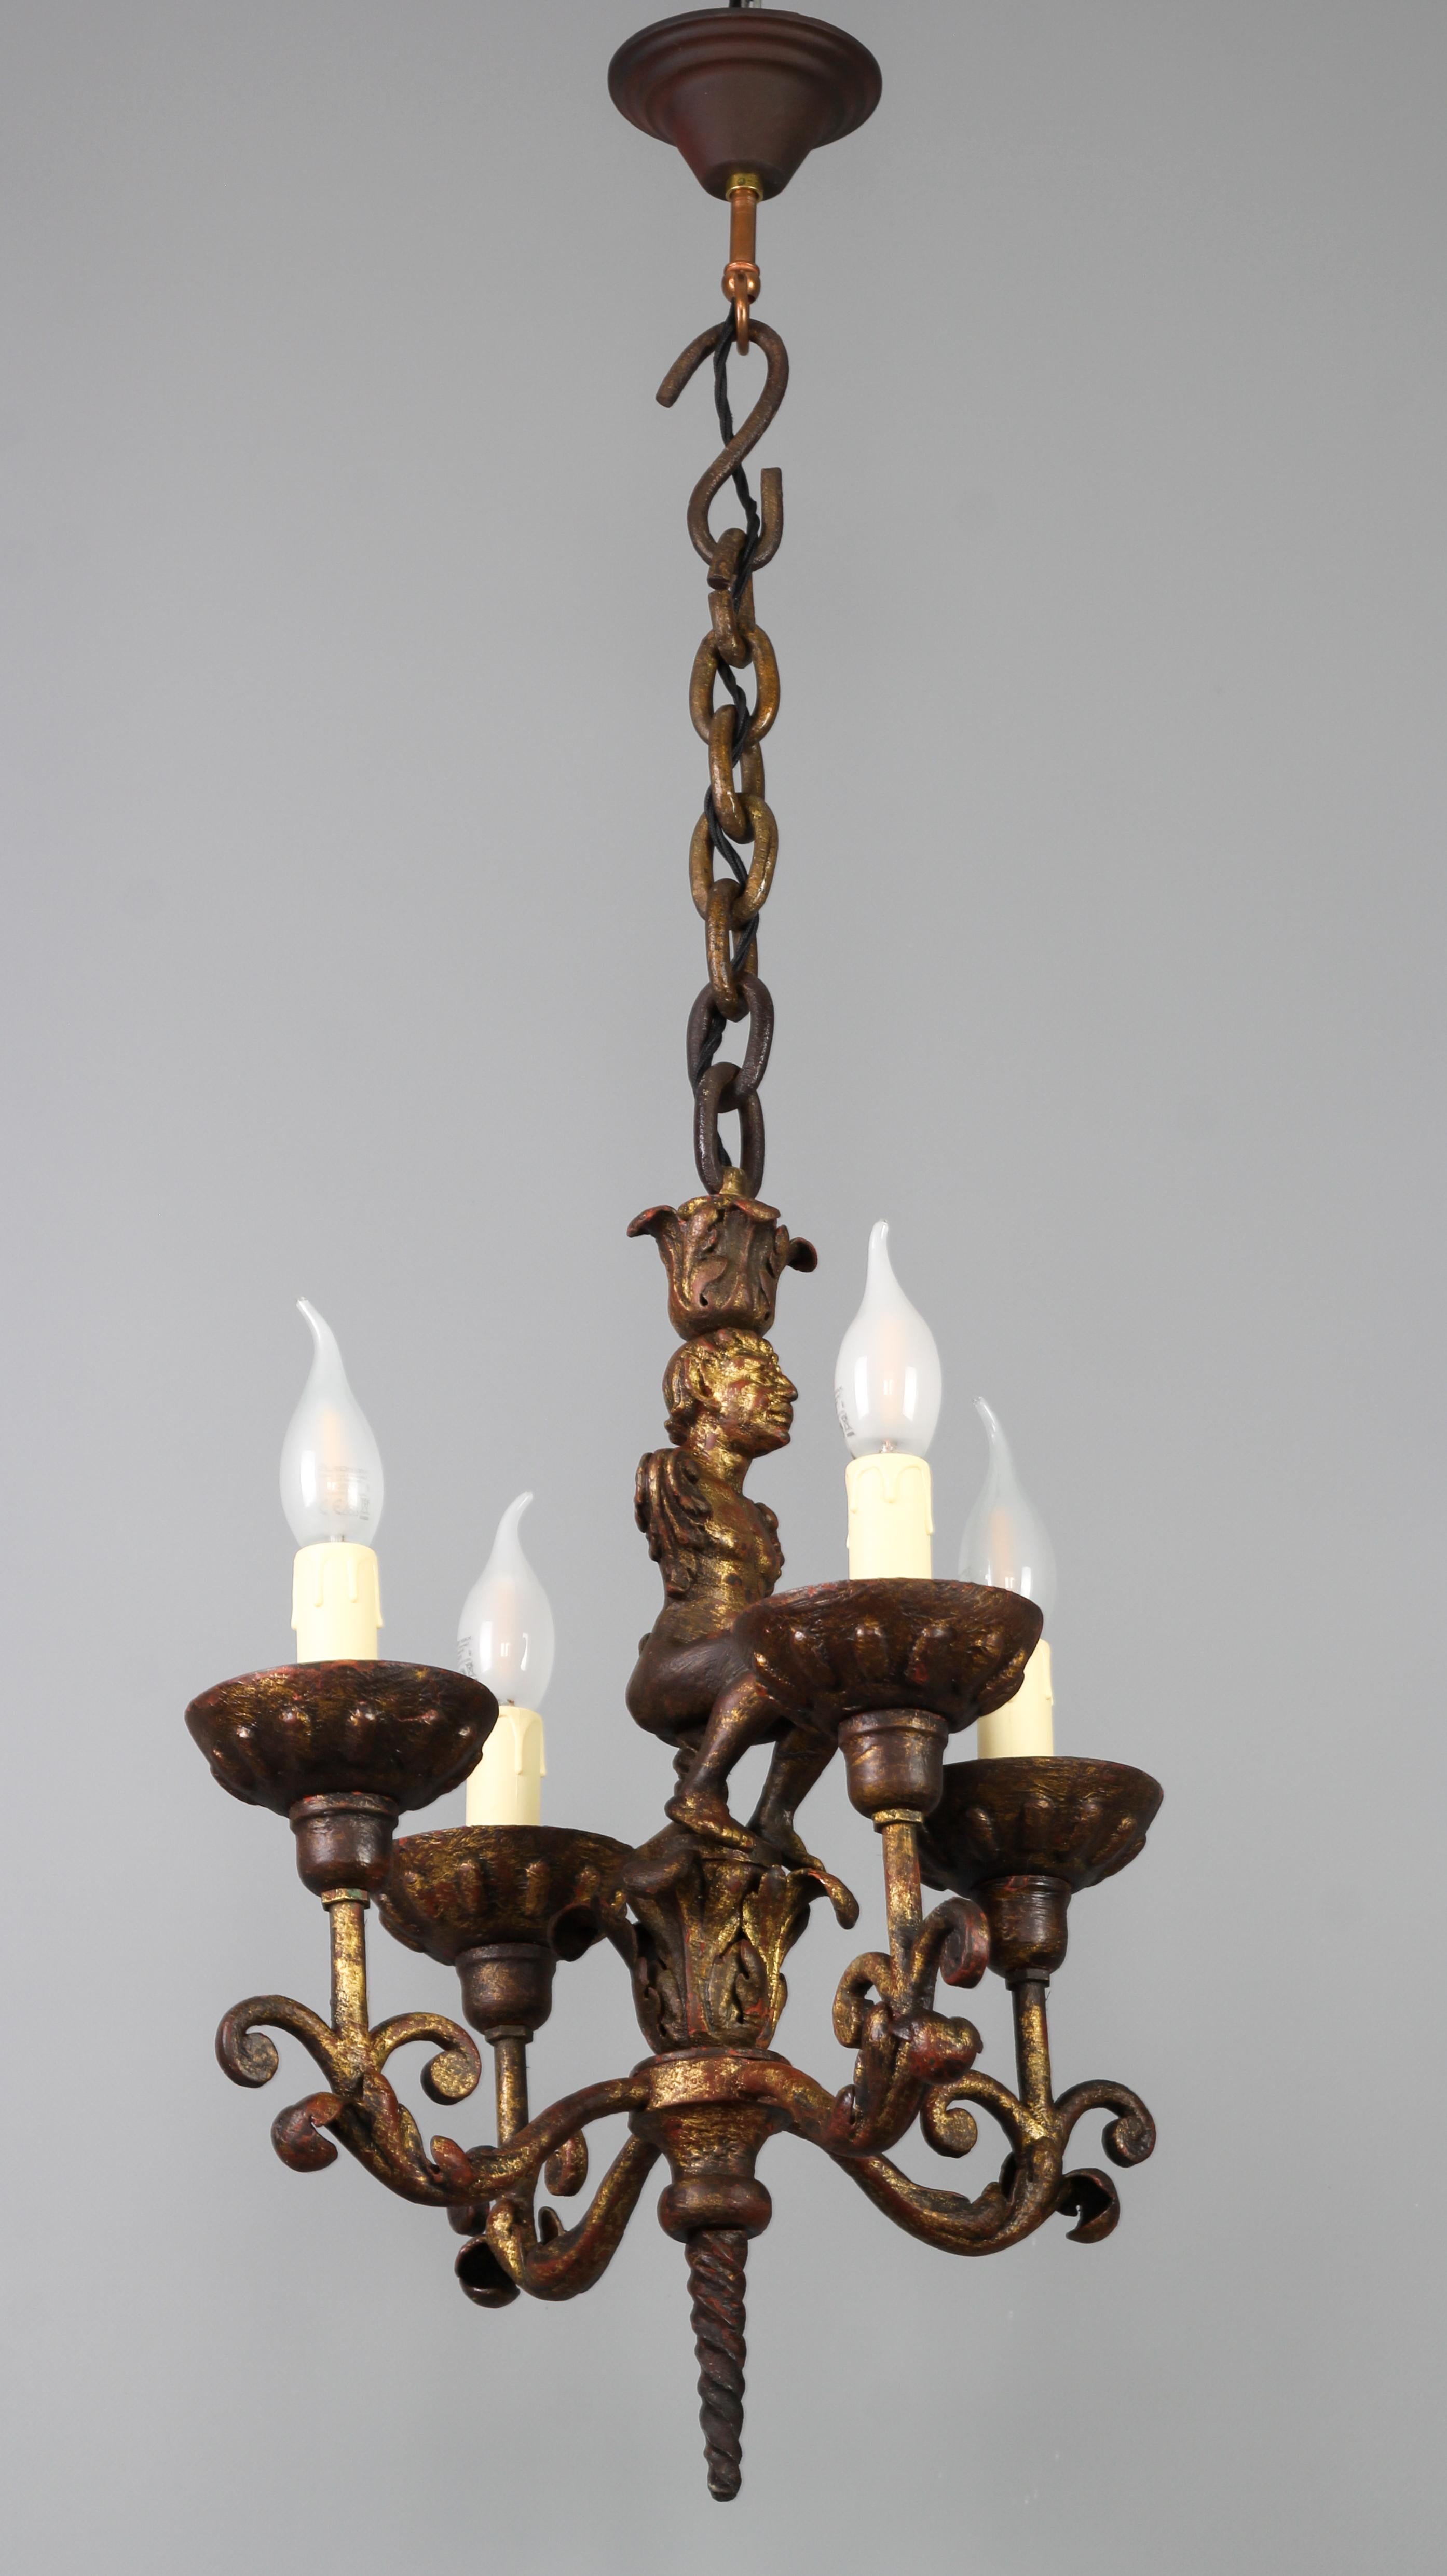 Antique wrought iron Baroque style four-light figural chandelier, France, late 19th century. Previously a candle chandelier, it has been electrified in the 20th century.
This unique and impressive golden and red patinated hand-crafted wrought iron